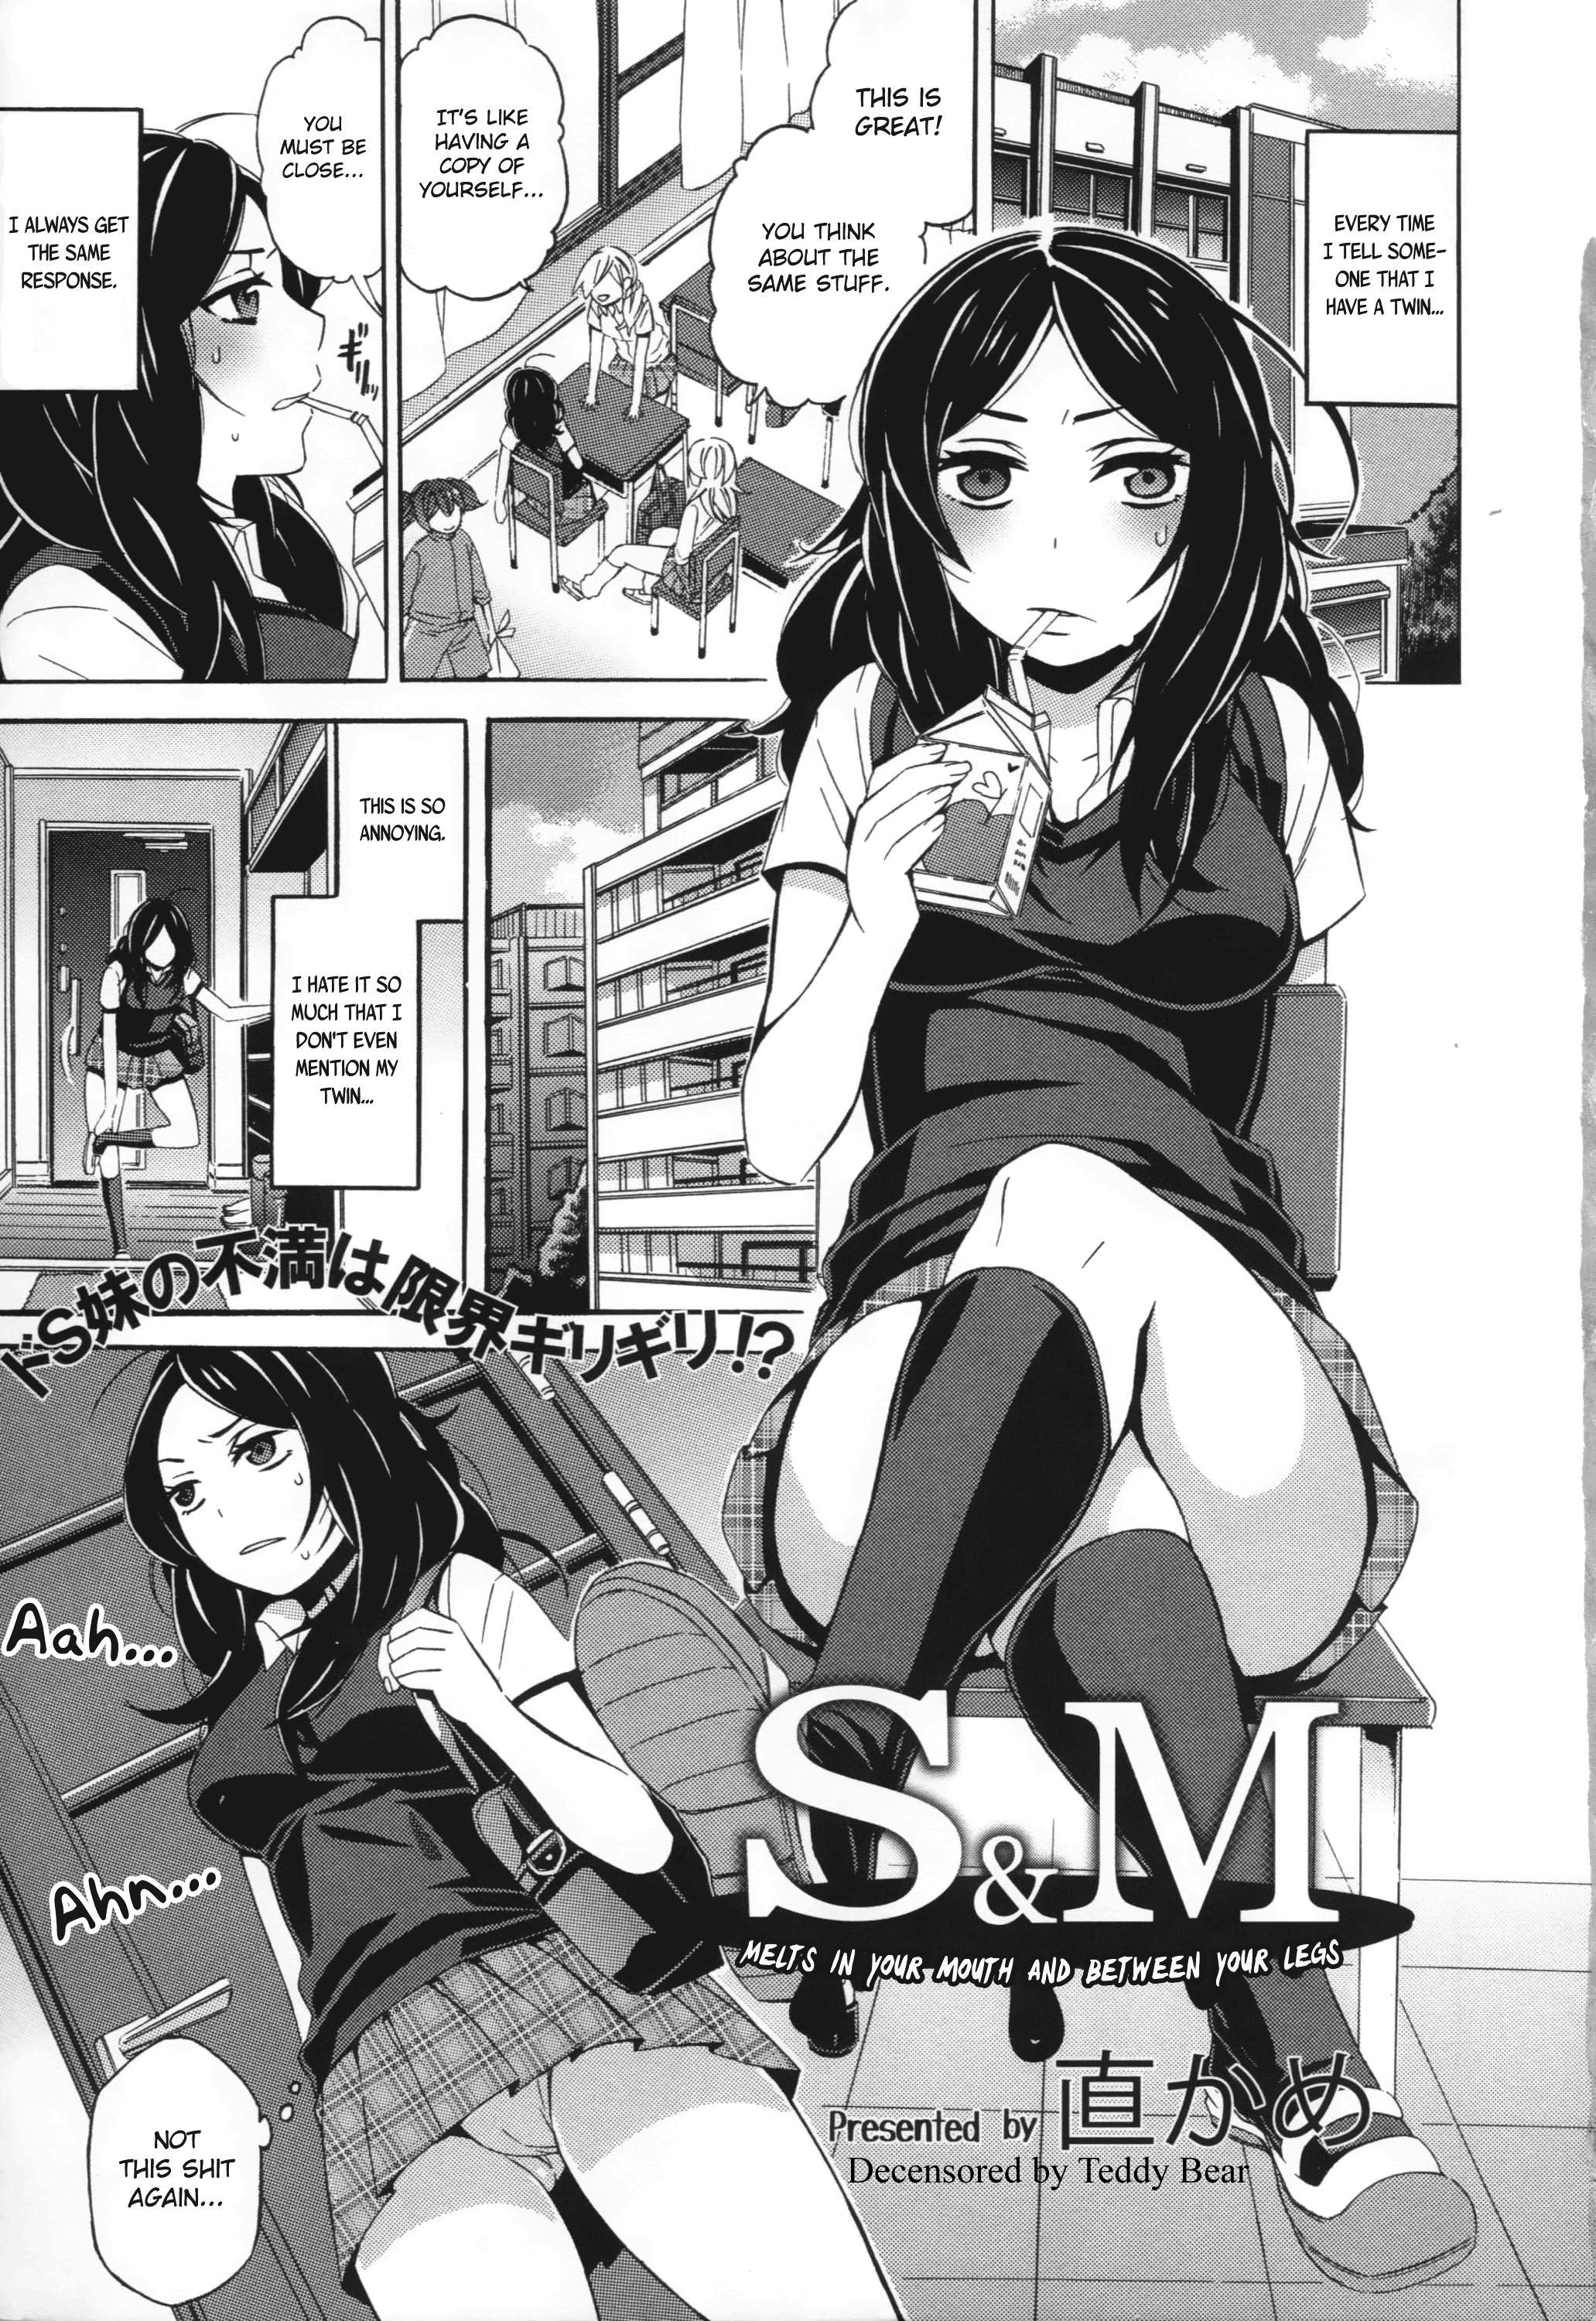 Naokame S&M ~Melts in Your Mouth and Between Your Legs Hentai Comic